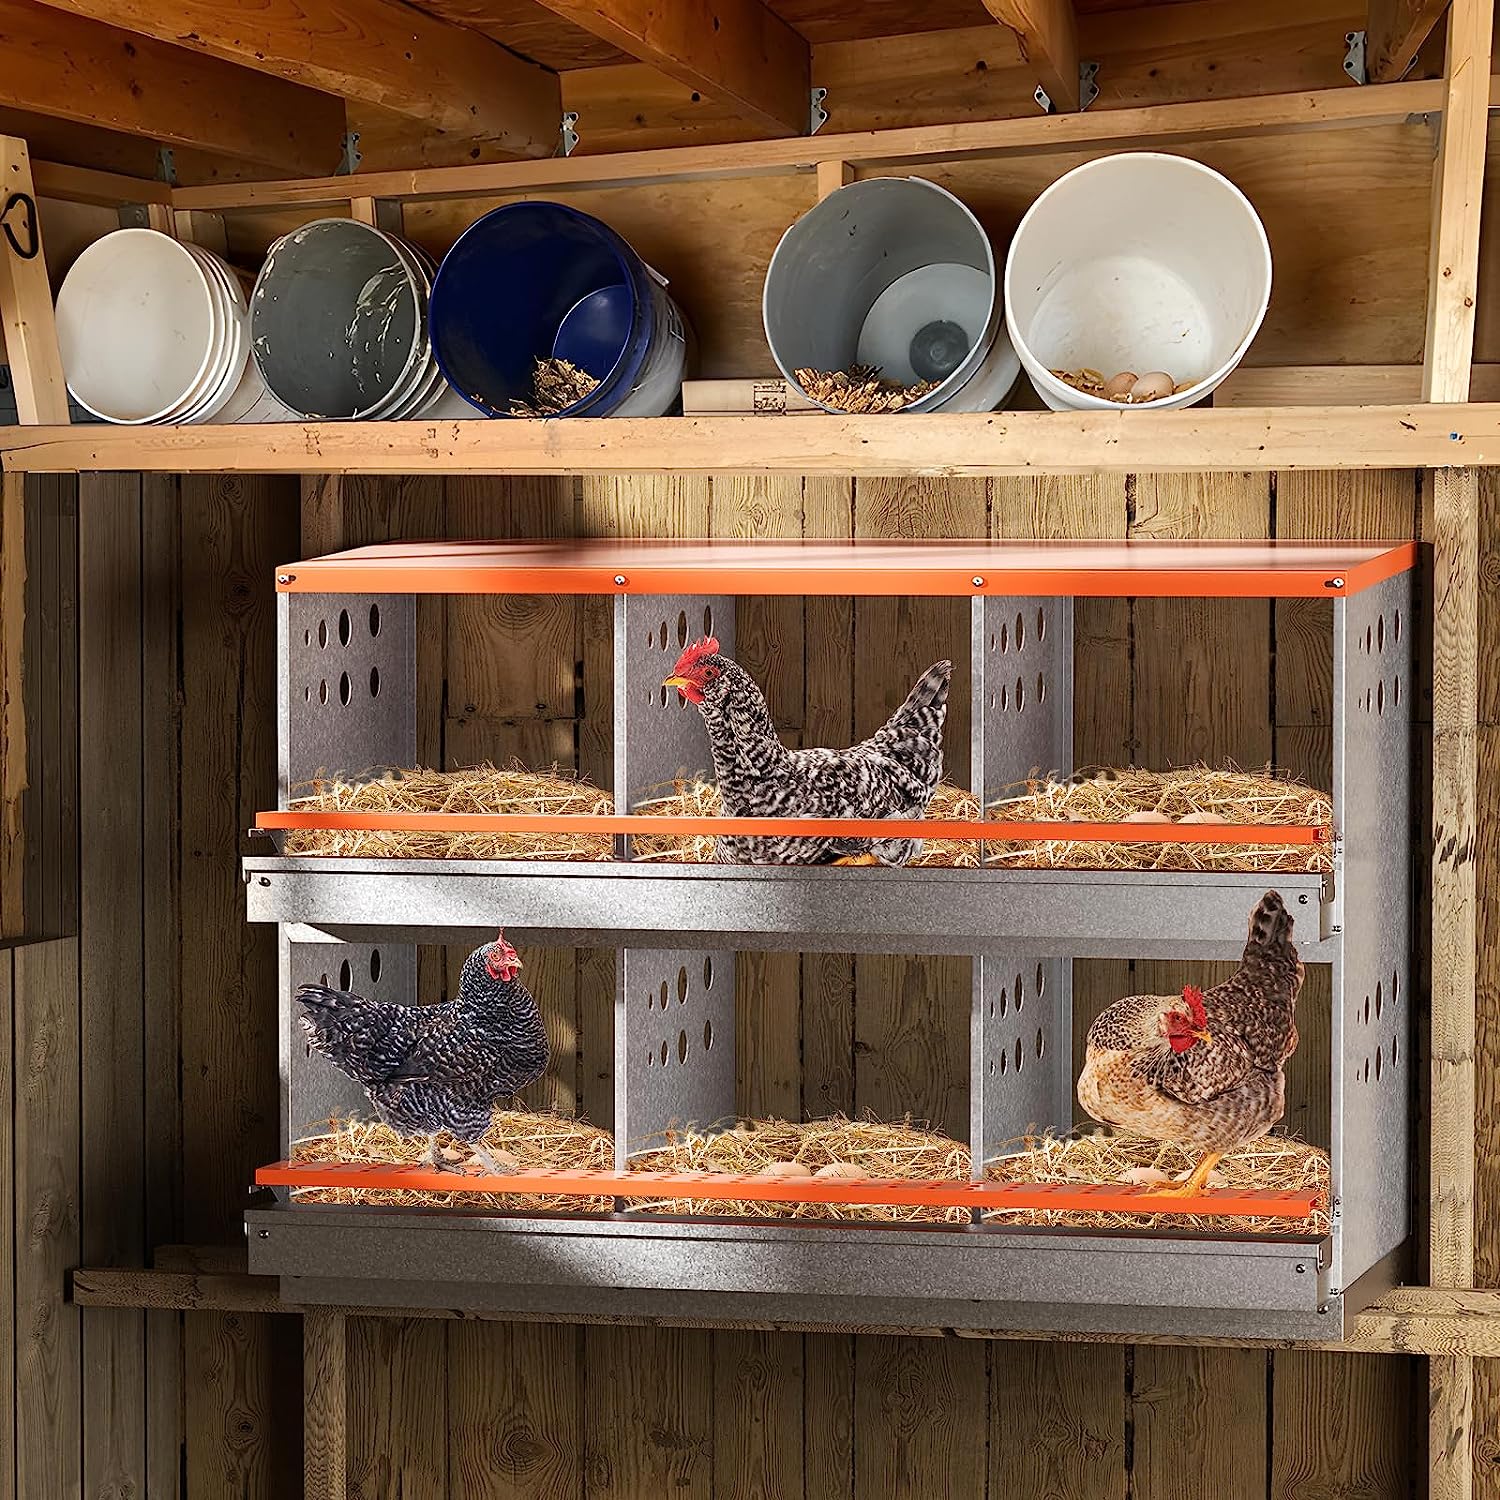 How To Make Nesting Boxes For Chickens